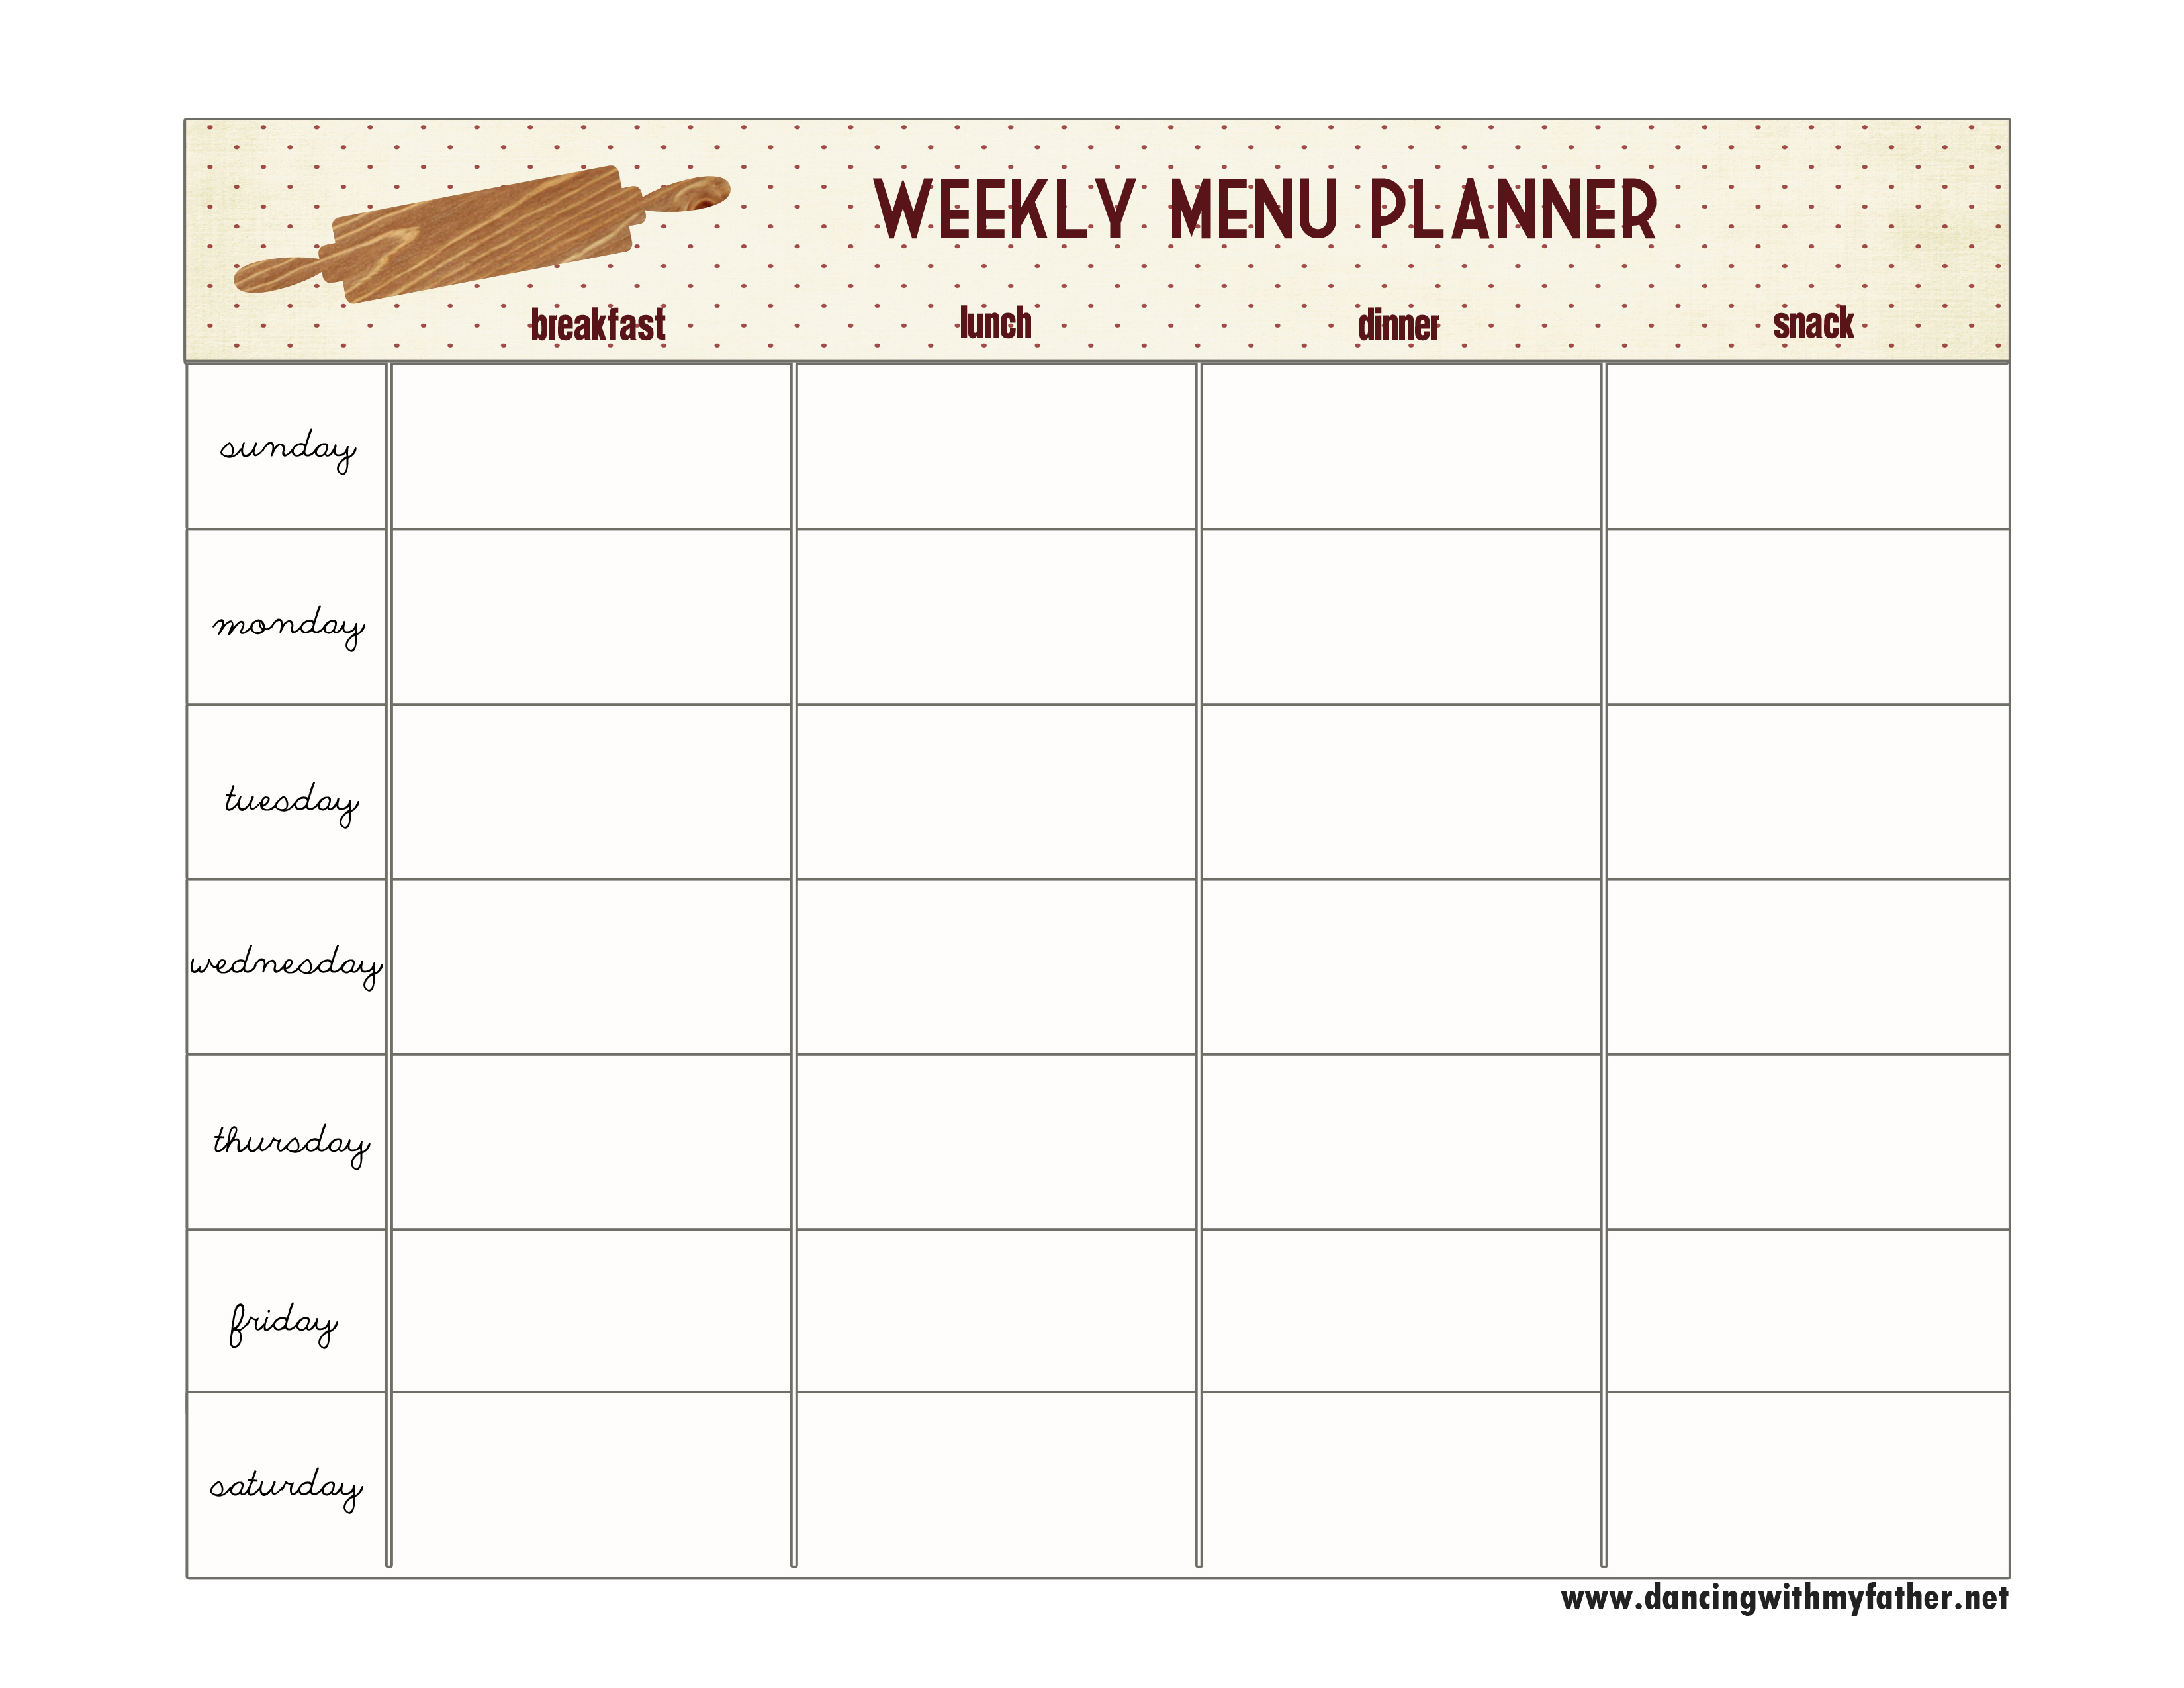 one-step-toward-organized-free-printable-menu-planner-dancing-with-my-father